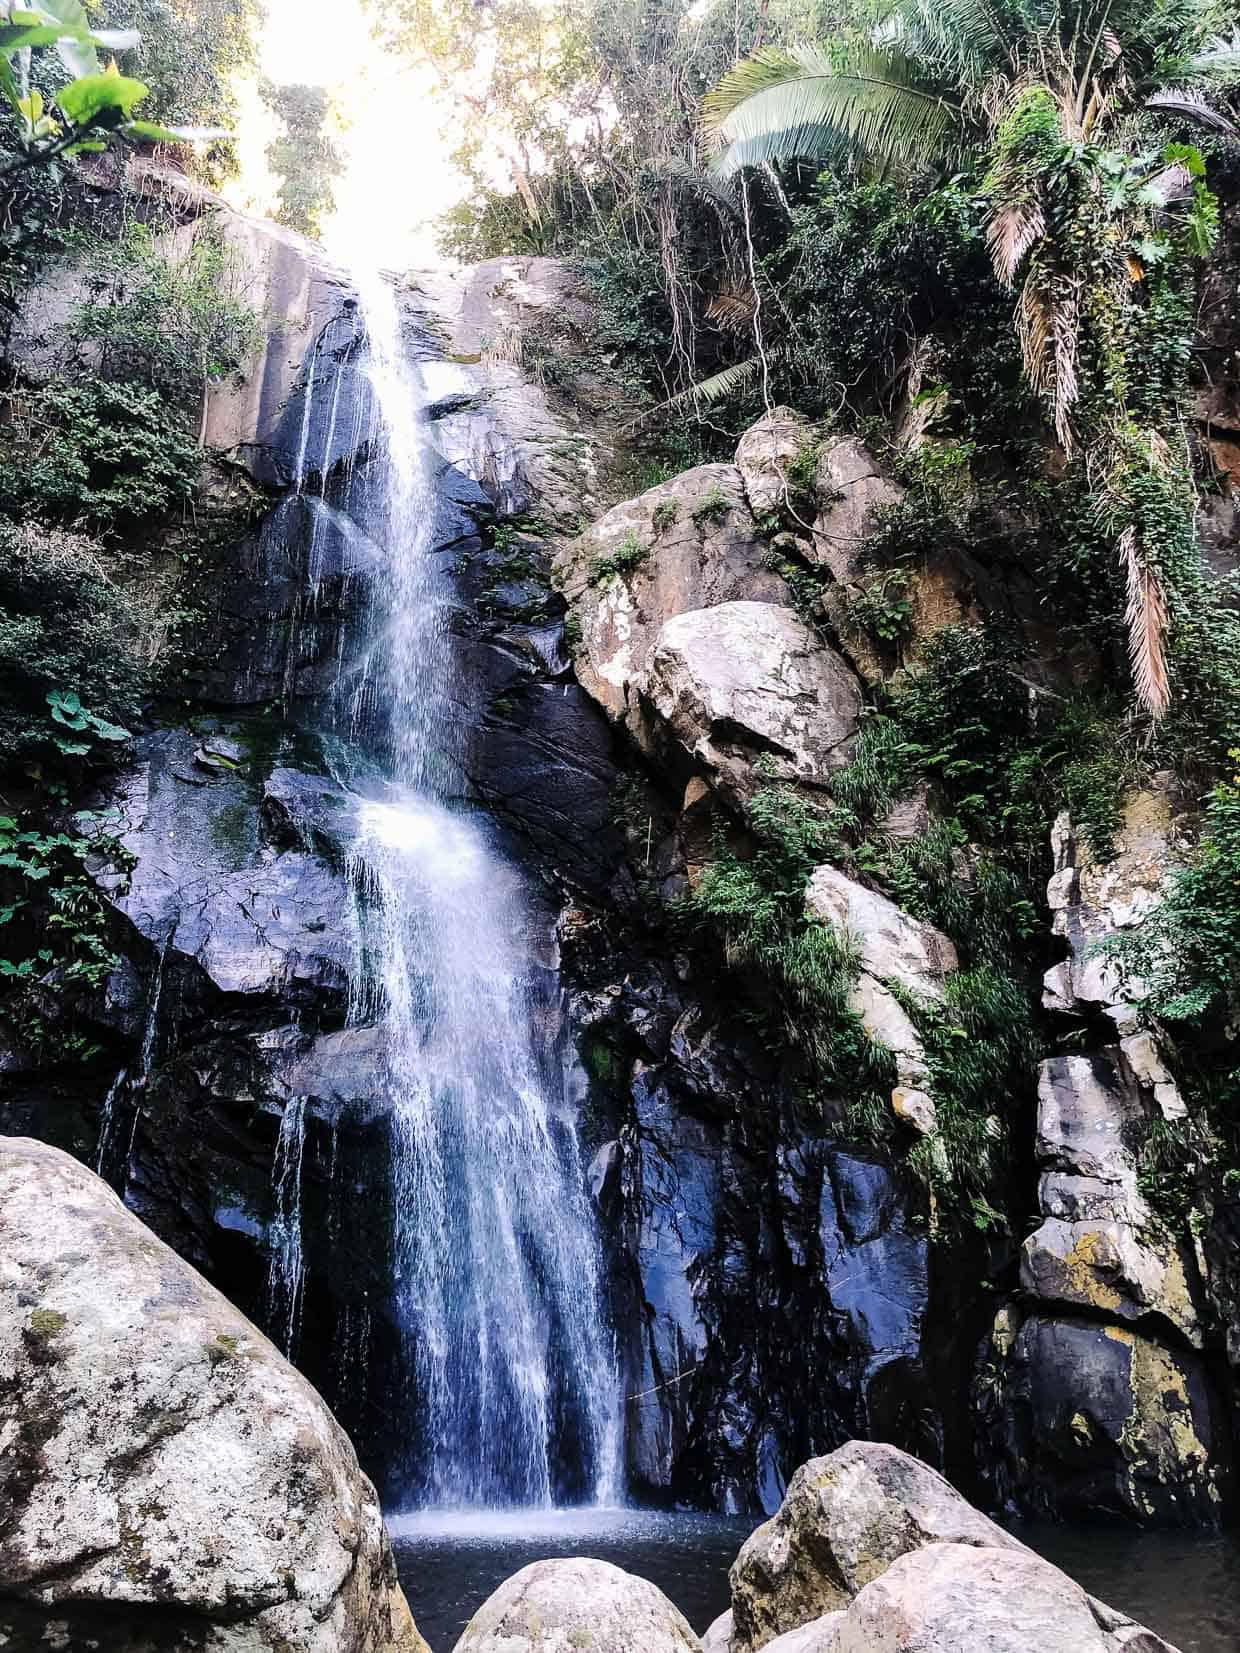 The Yelapa Waterfall is one of many excursions in Mexico with Princess Cruises.